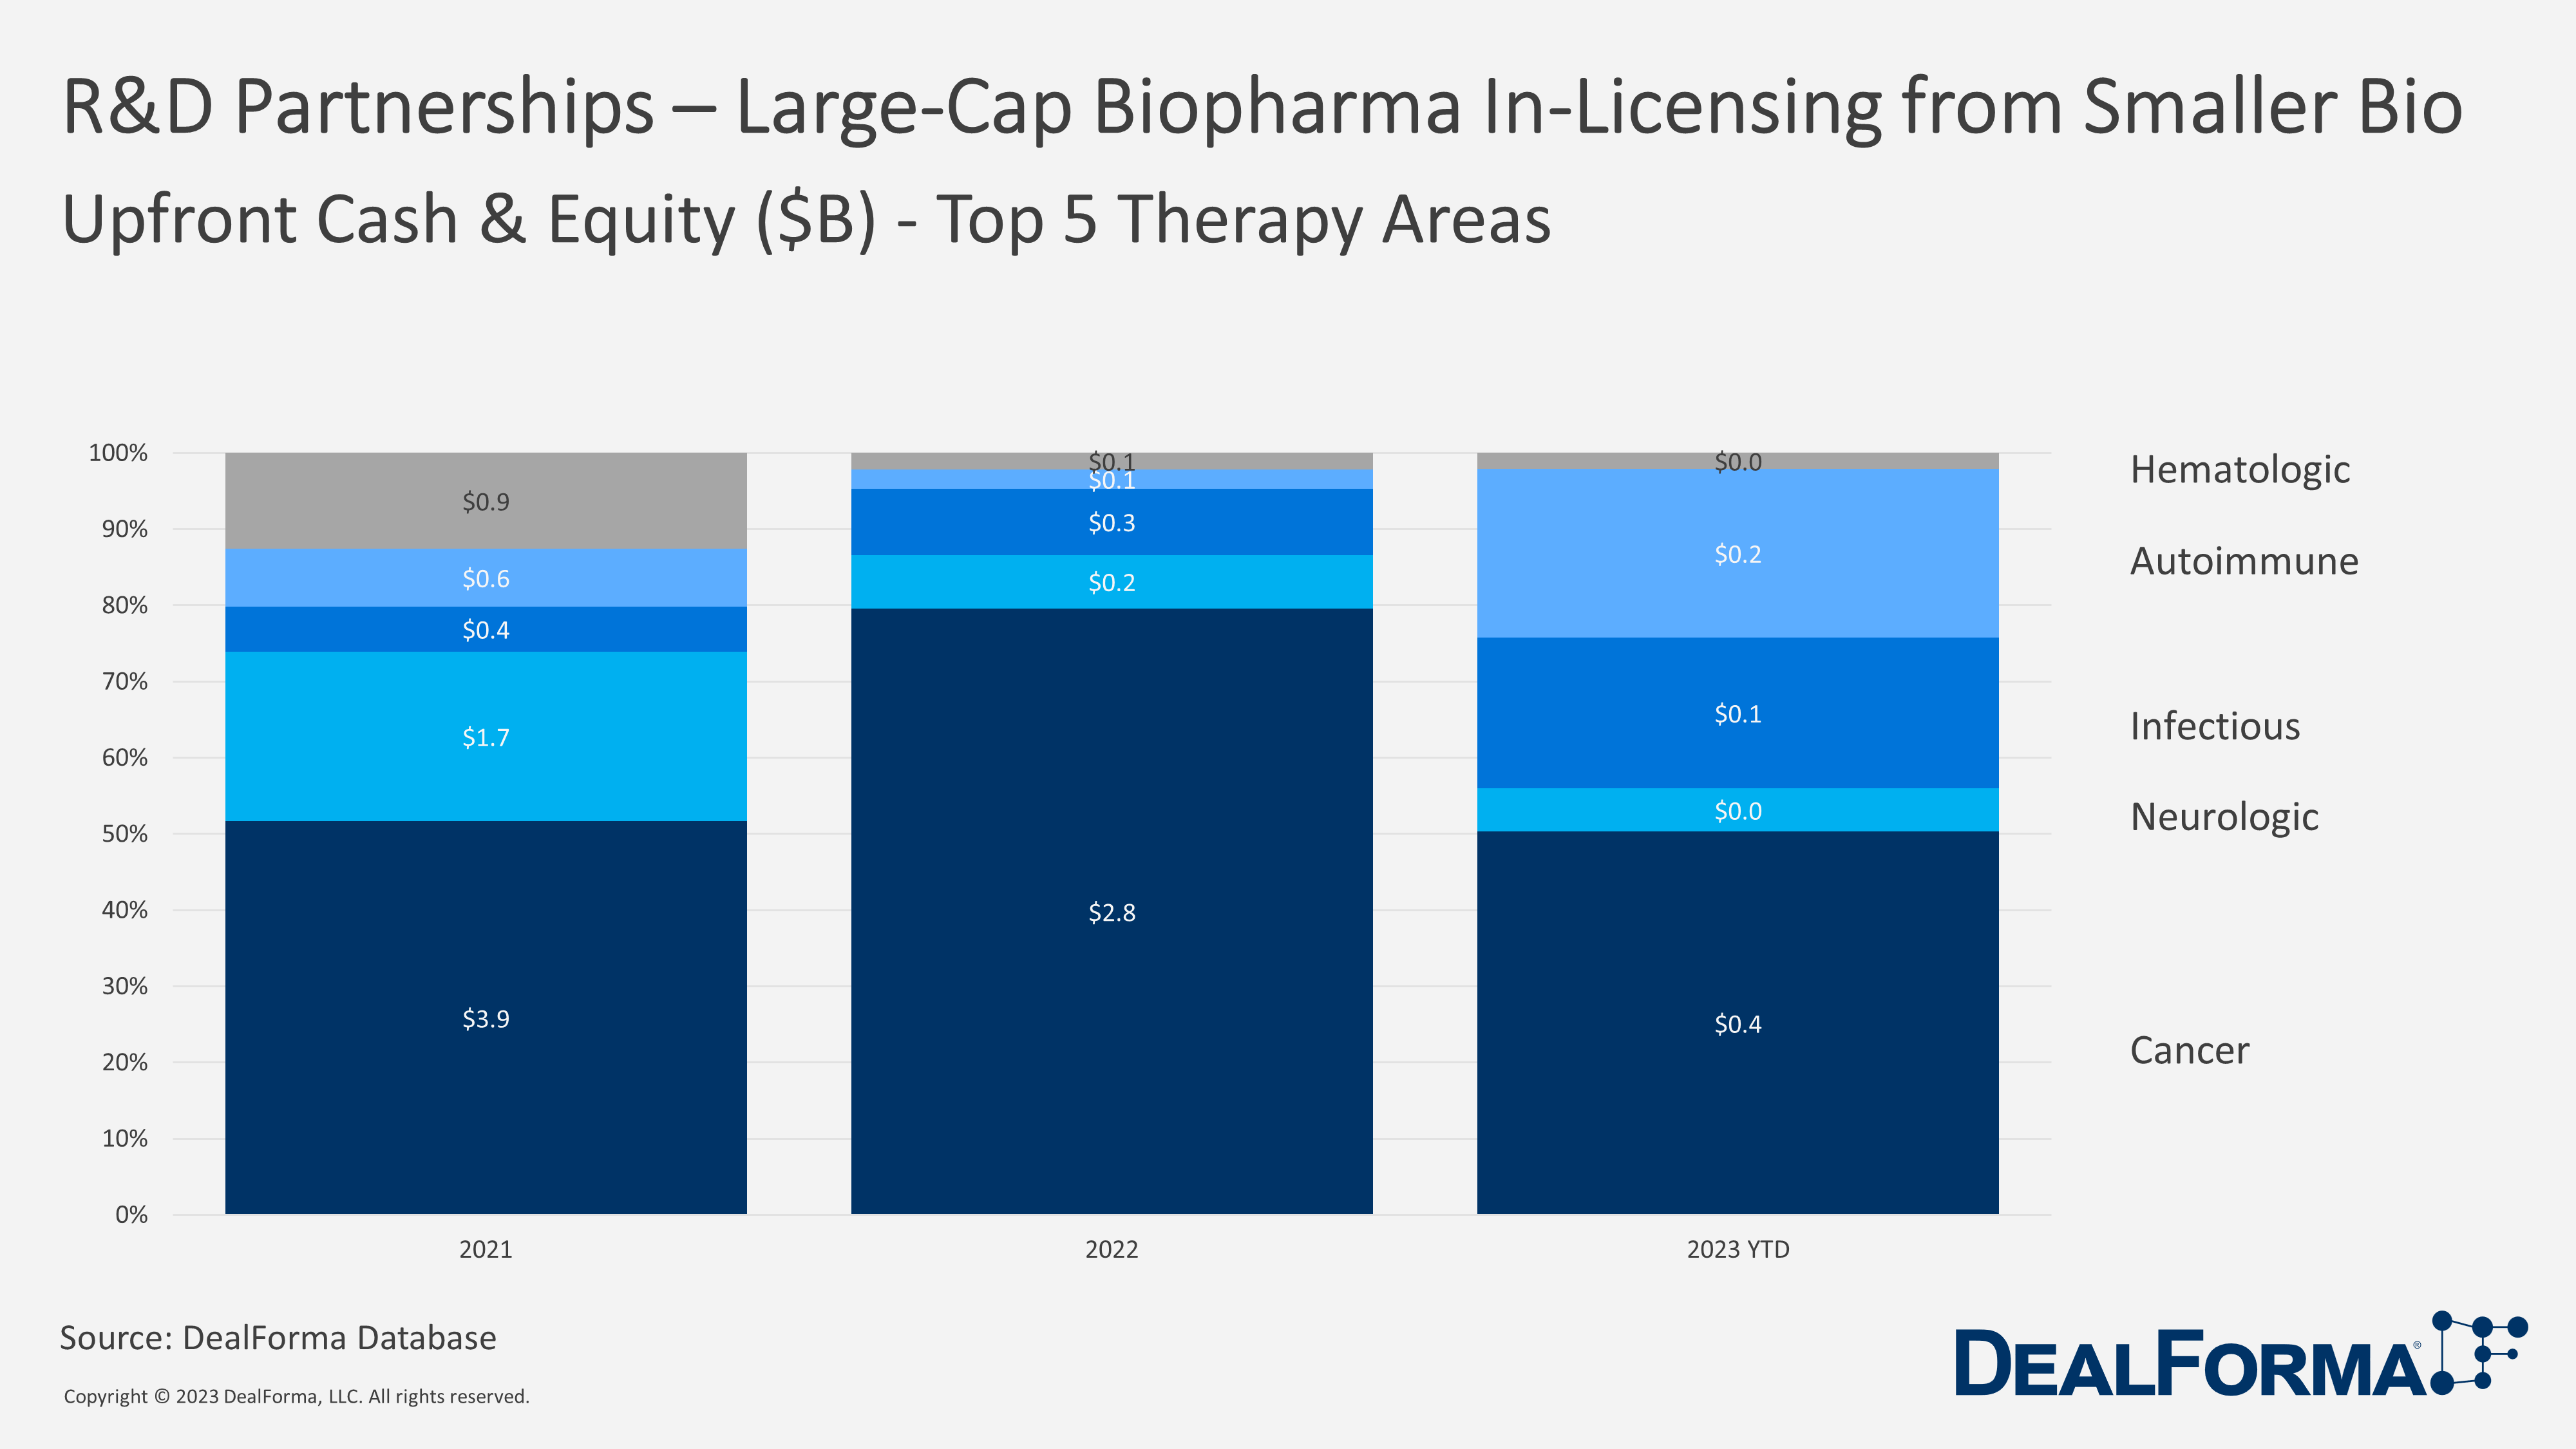 R&D Partnerships - Large-Cap Biopharma In-Licensing from Smaller Bio. Upfront cash & Equity ($B) - Top 5 Therapy Areas